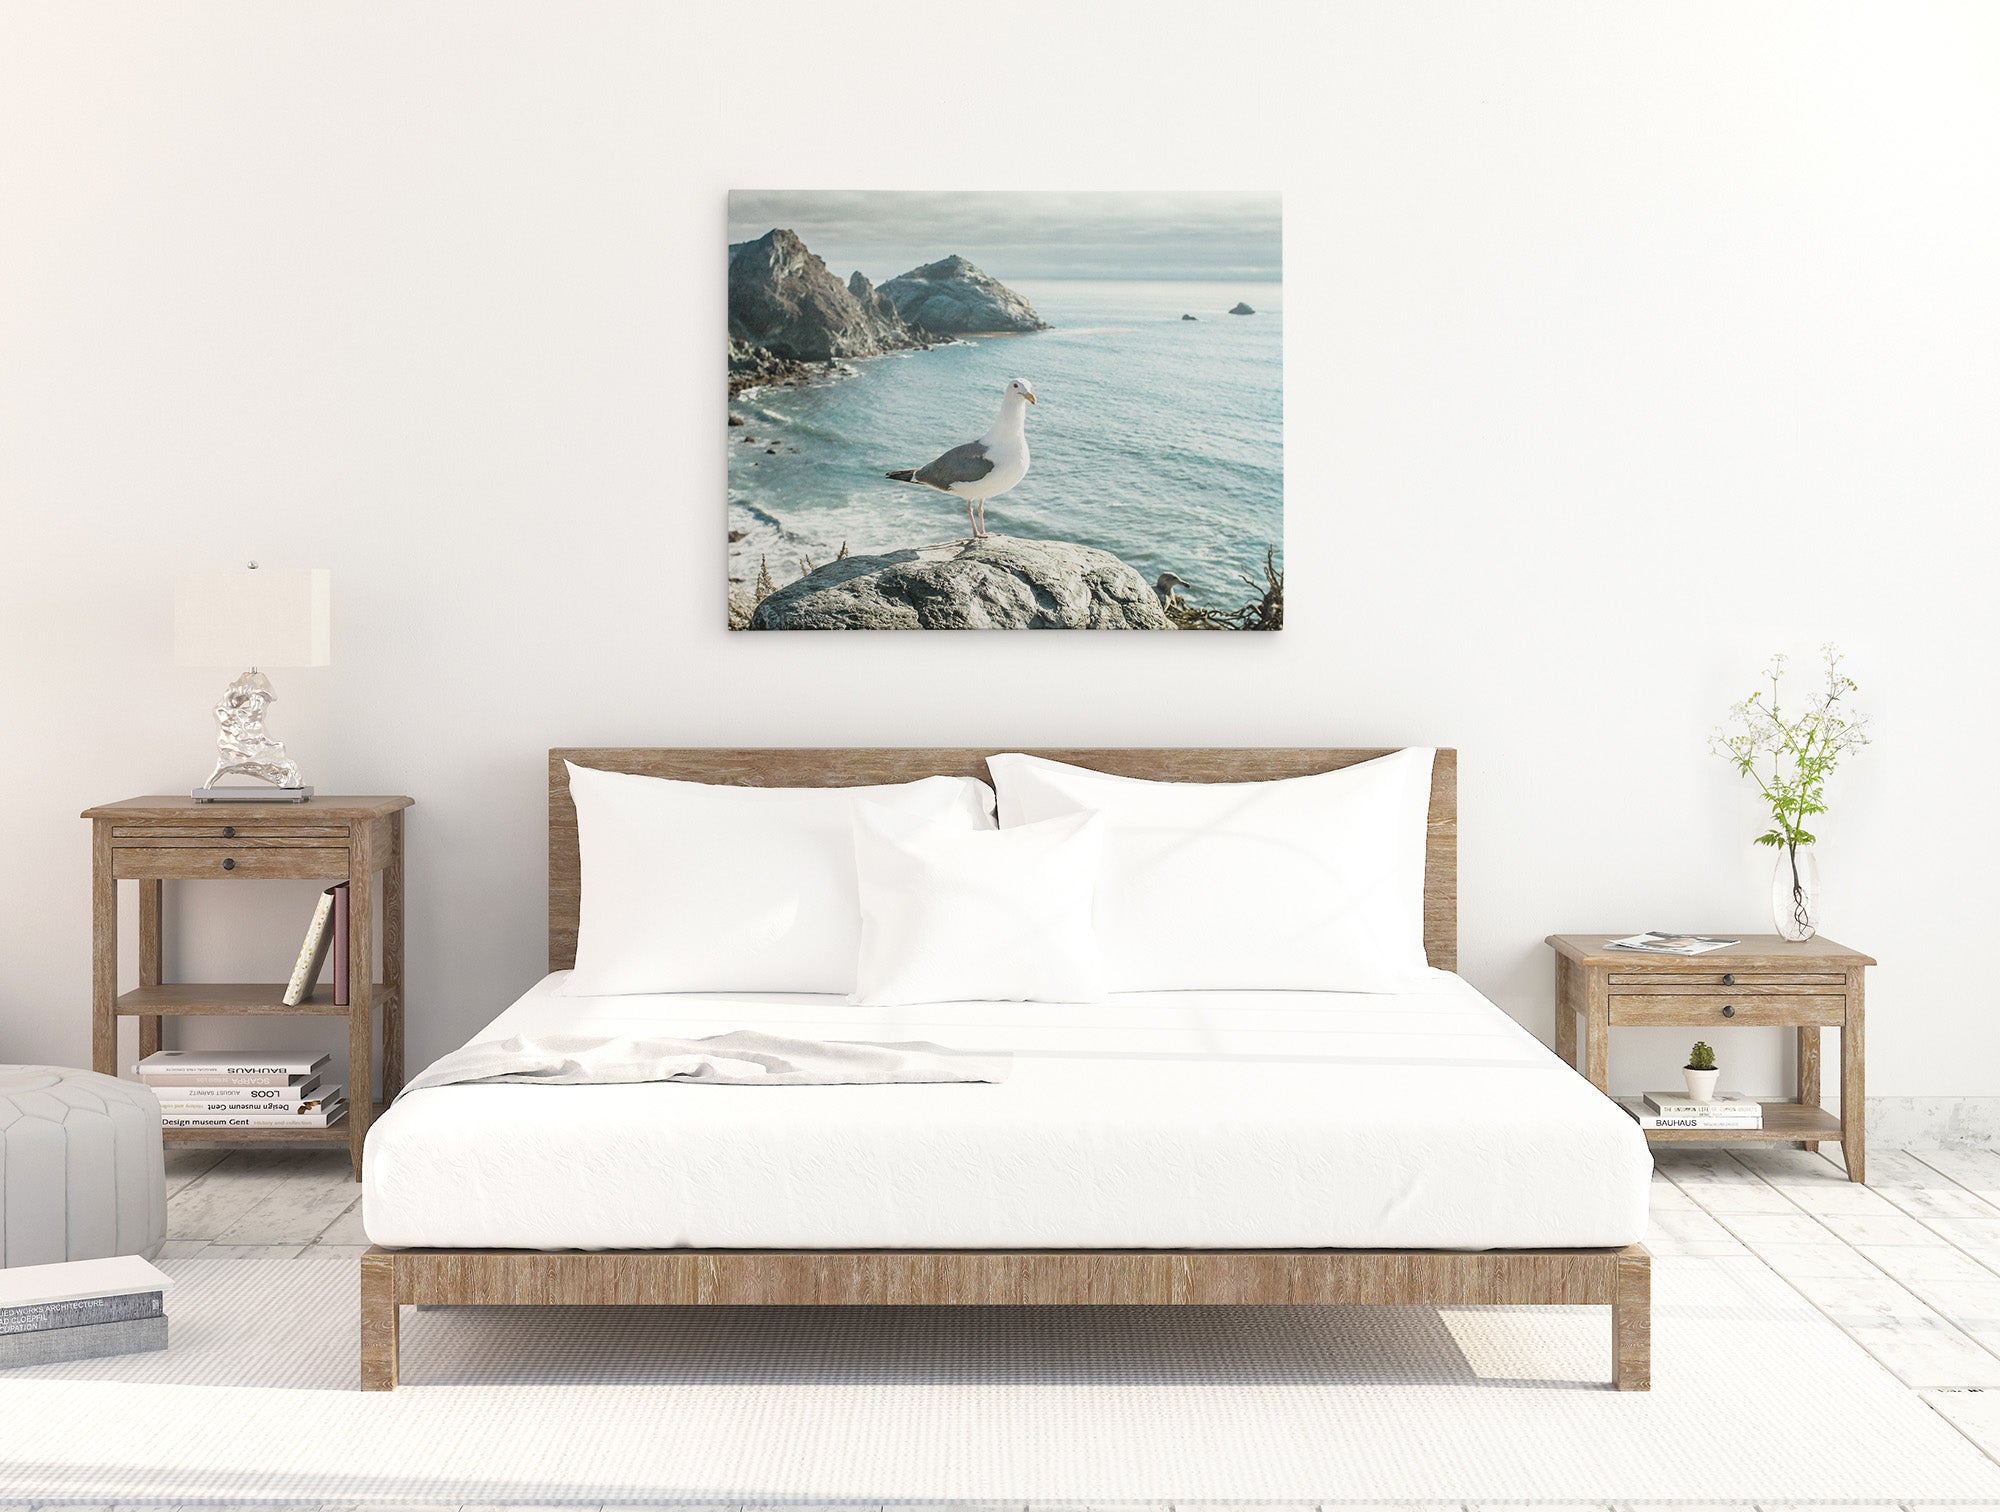 Bedroom canvas wall art featuring a coastal scene of a seagull on a rock in Big Sur